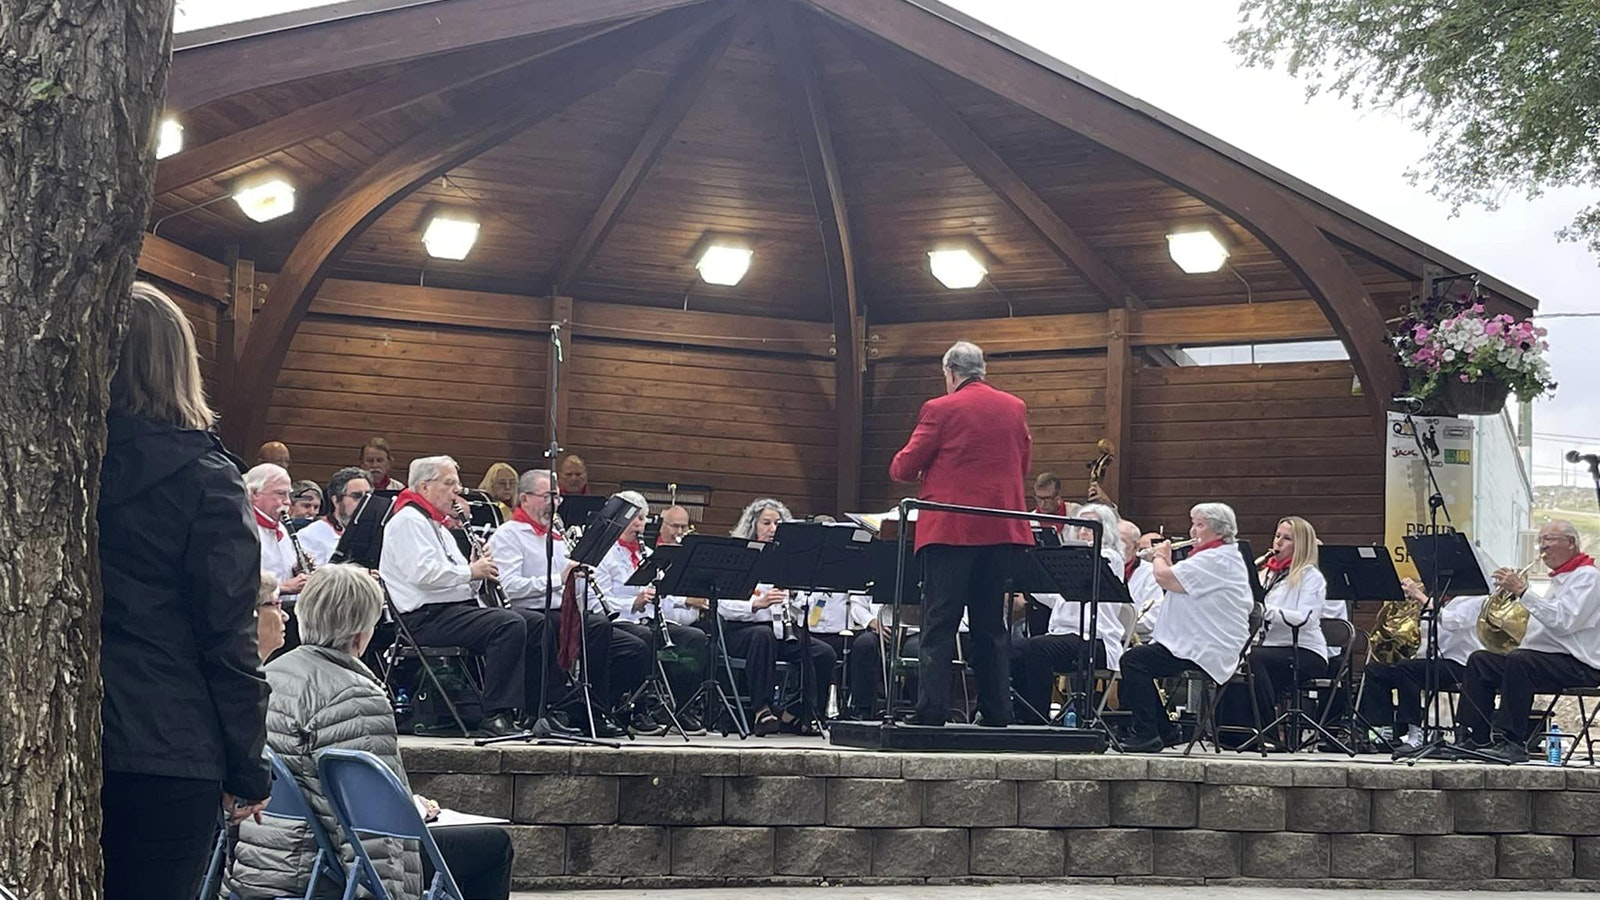 Airstreamers were entertained by a band complete with brass, strings, woodwind and bass sections. They also attended seminars ranging from content creation, working from the road and living off-grid, how to pound dents out of polished aluminum and many others.